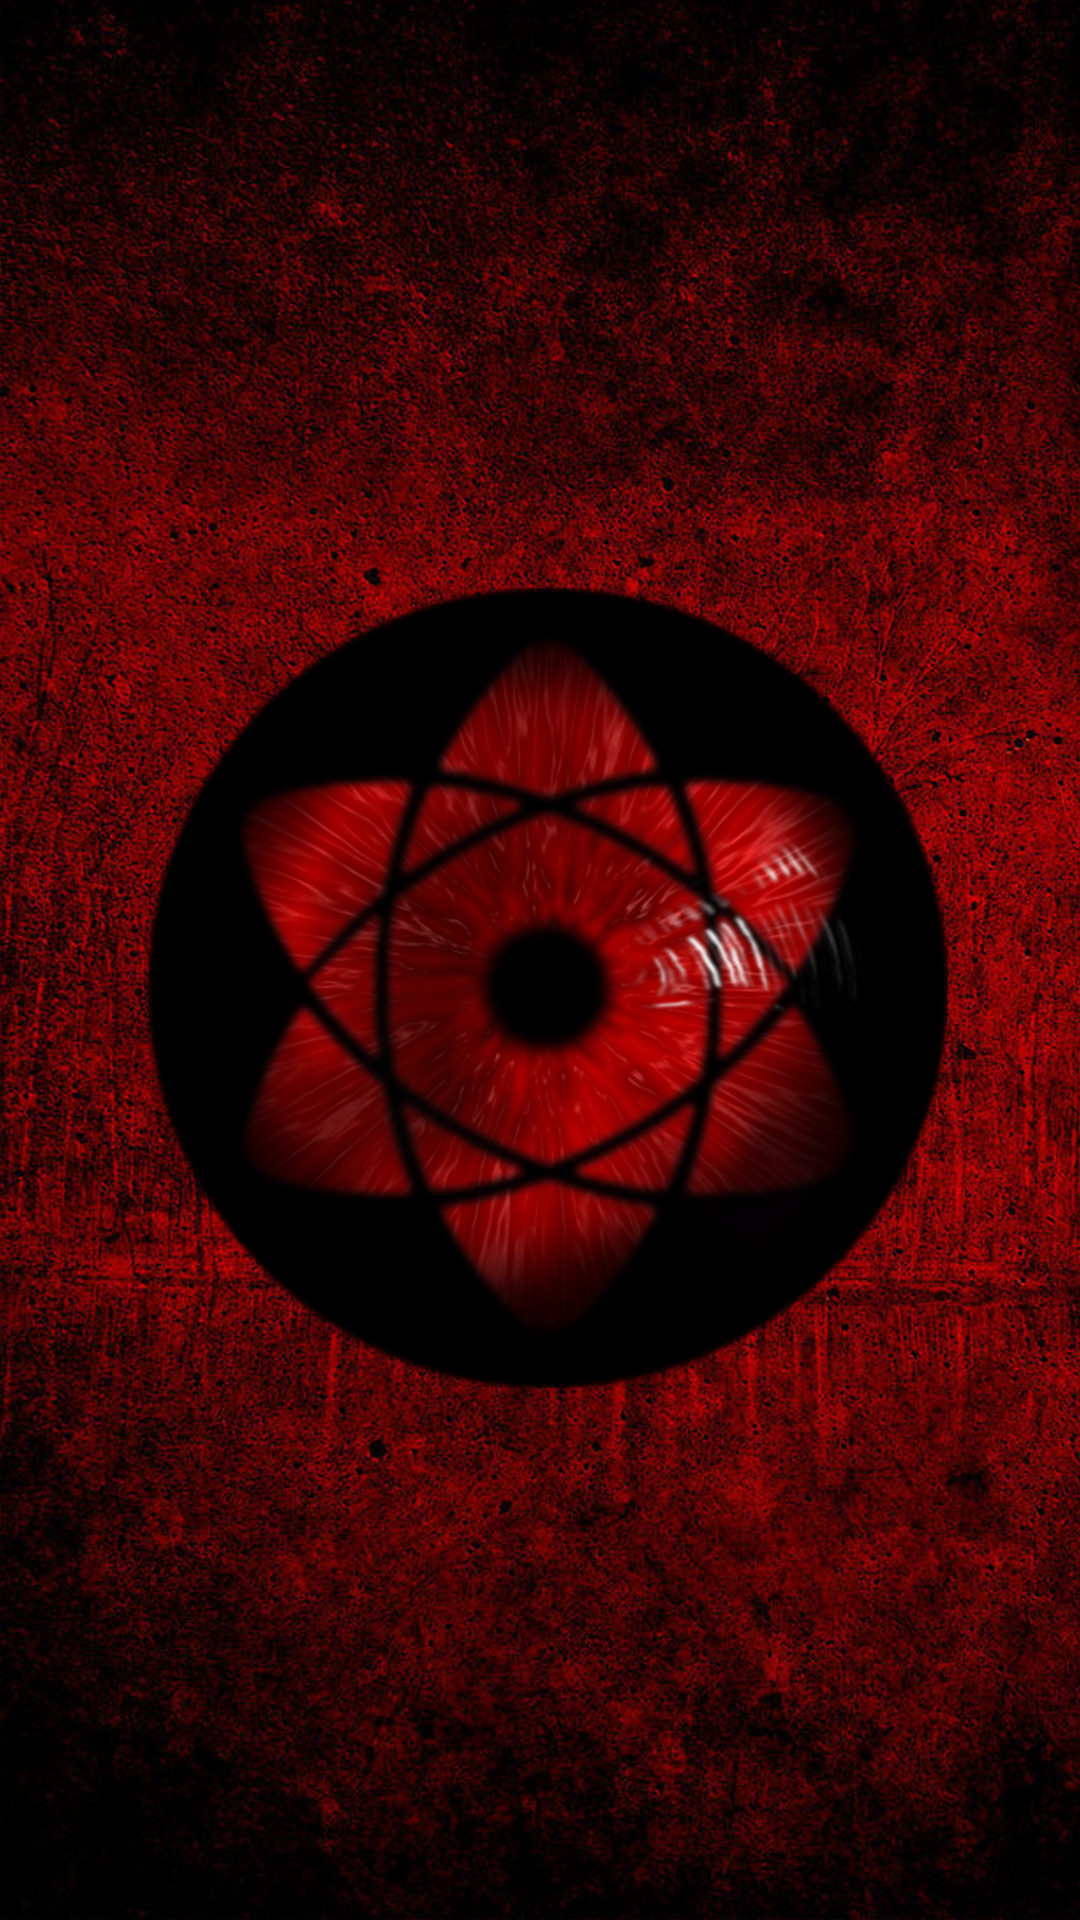 1080x1920 put together a sharingan phone wallpaper and thought you guys might like it